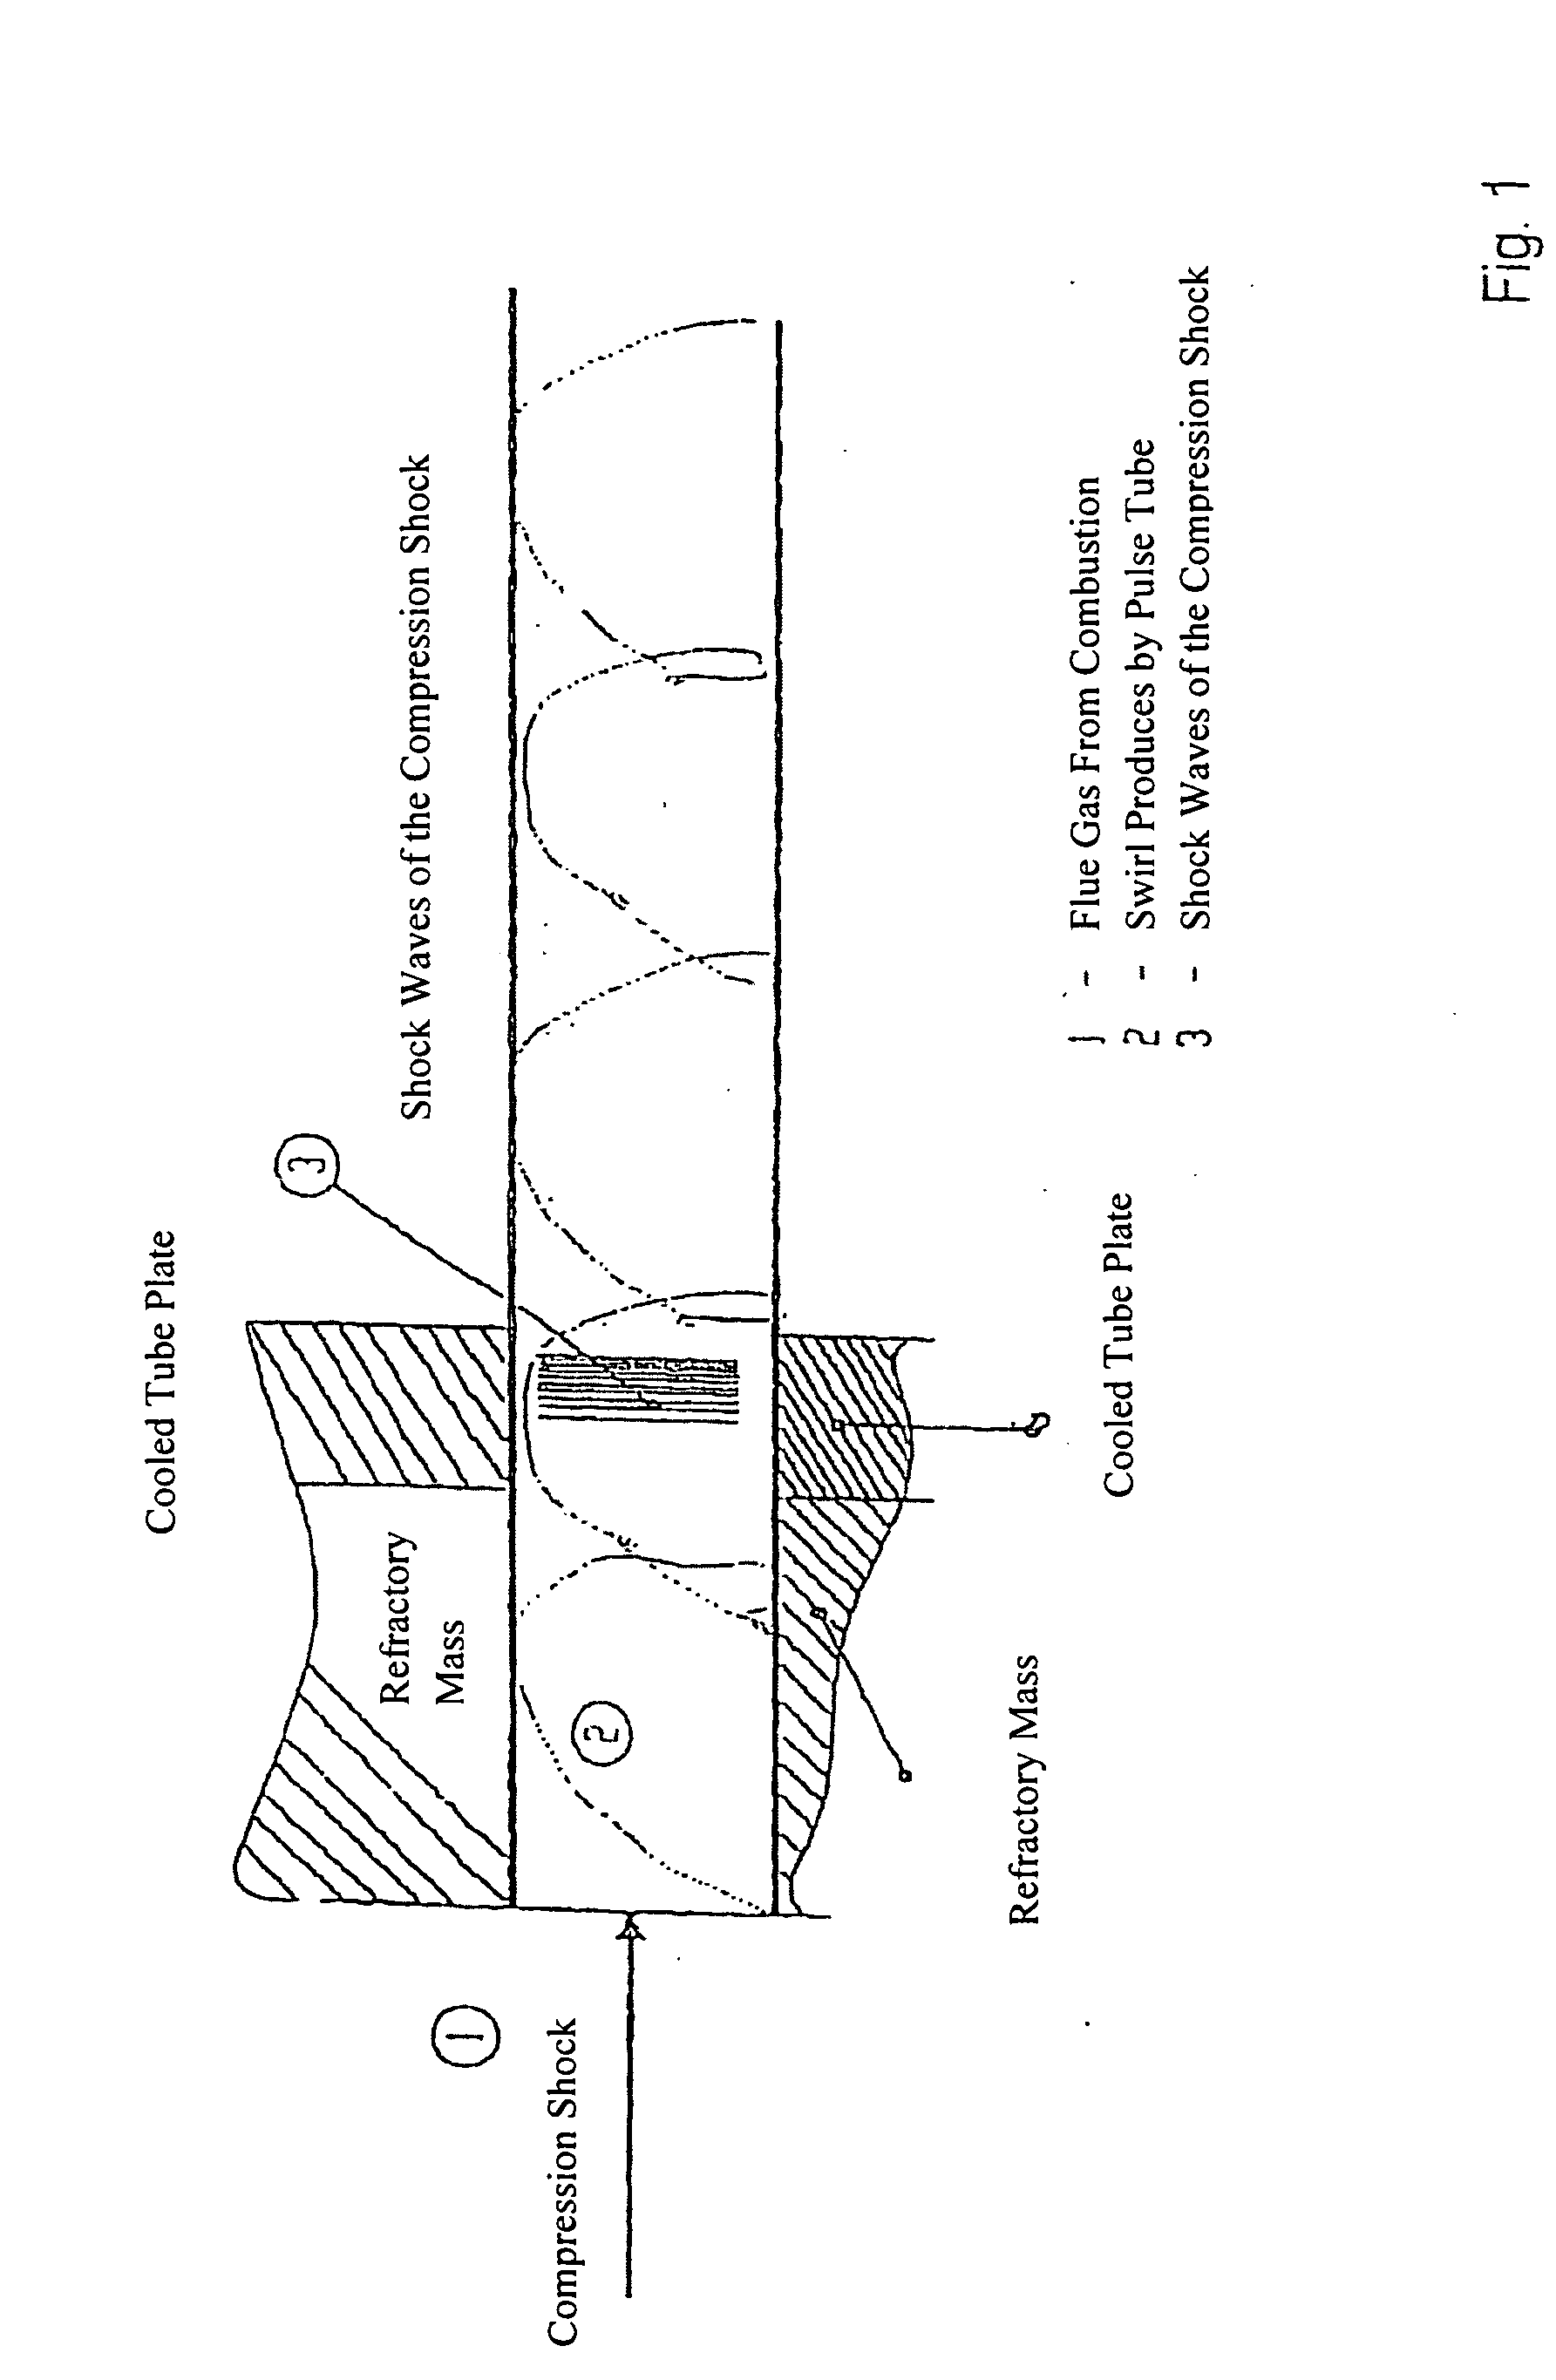 Method and device for achieving better heat transfer when using pulse heaters